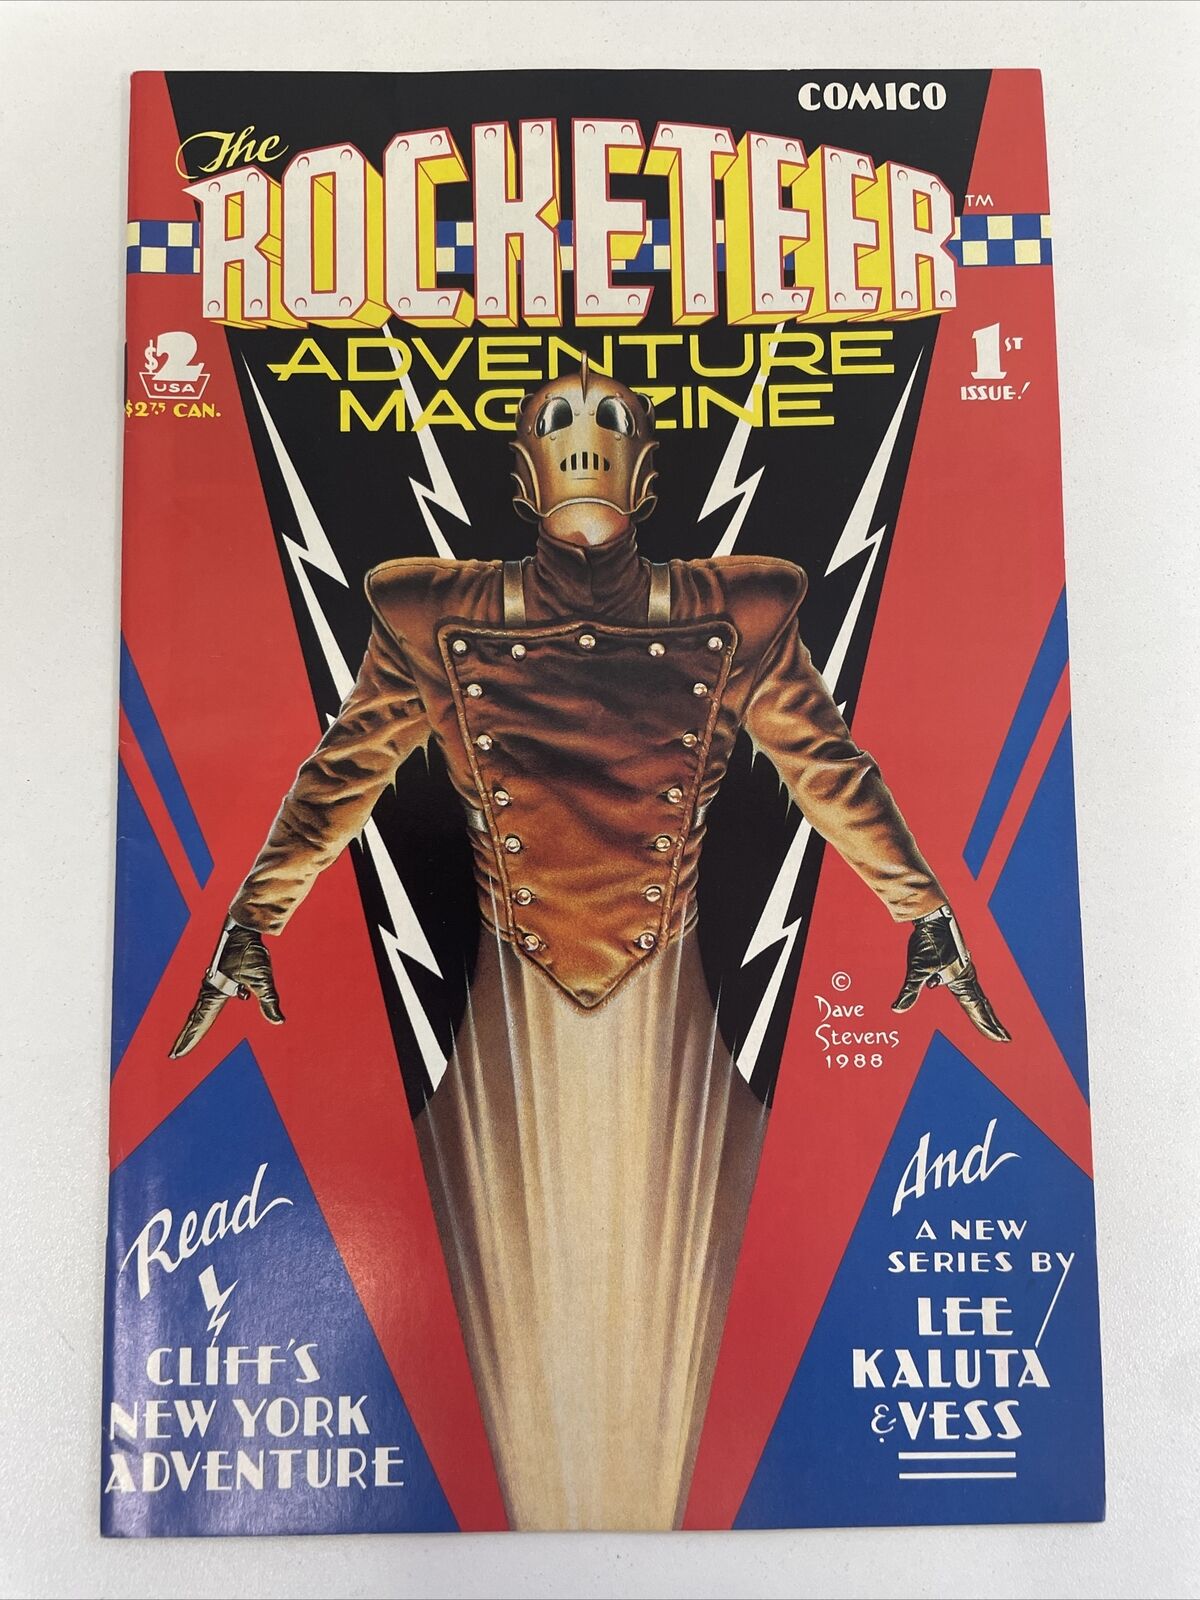 THE ROCKETEER ADVENTURE MAGAZINE # 1, JULY 1988, DAVE STEVENS VERY FINE COND.